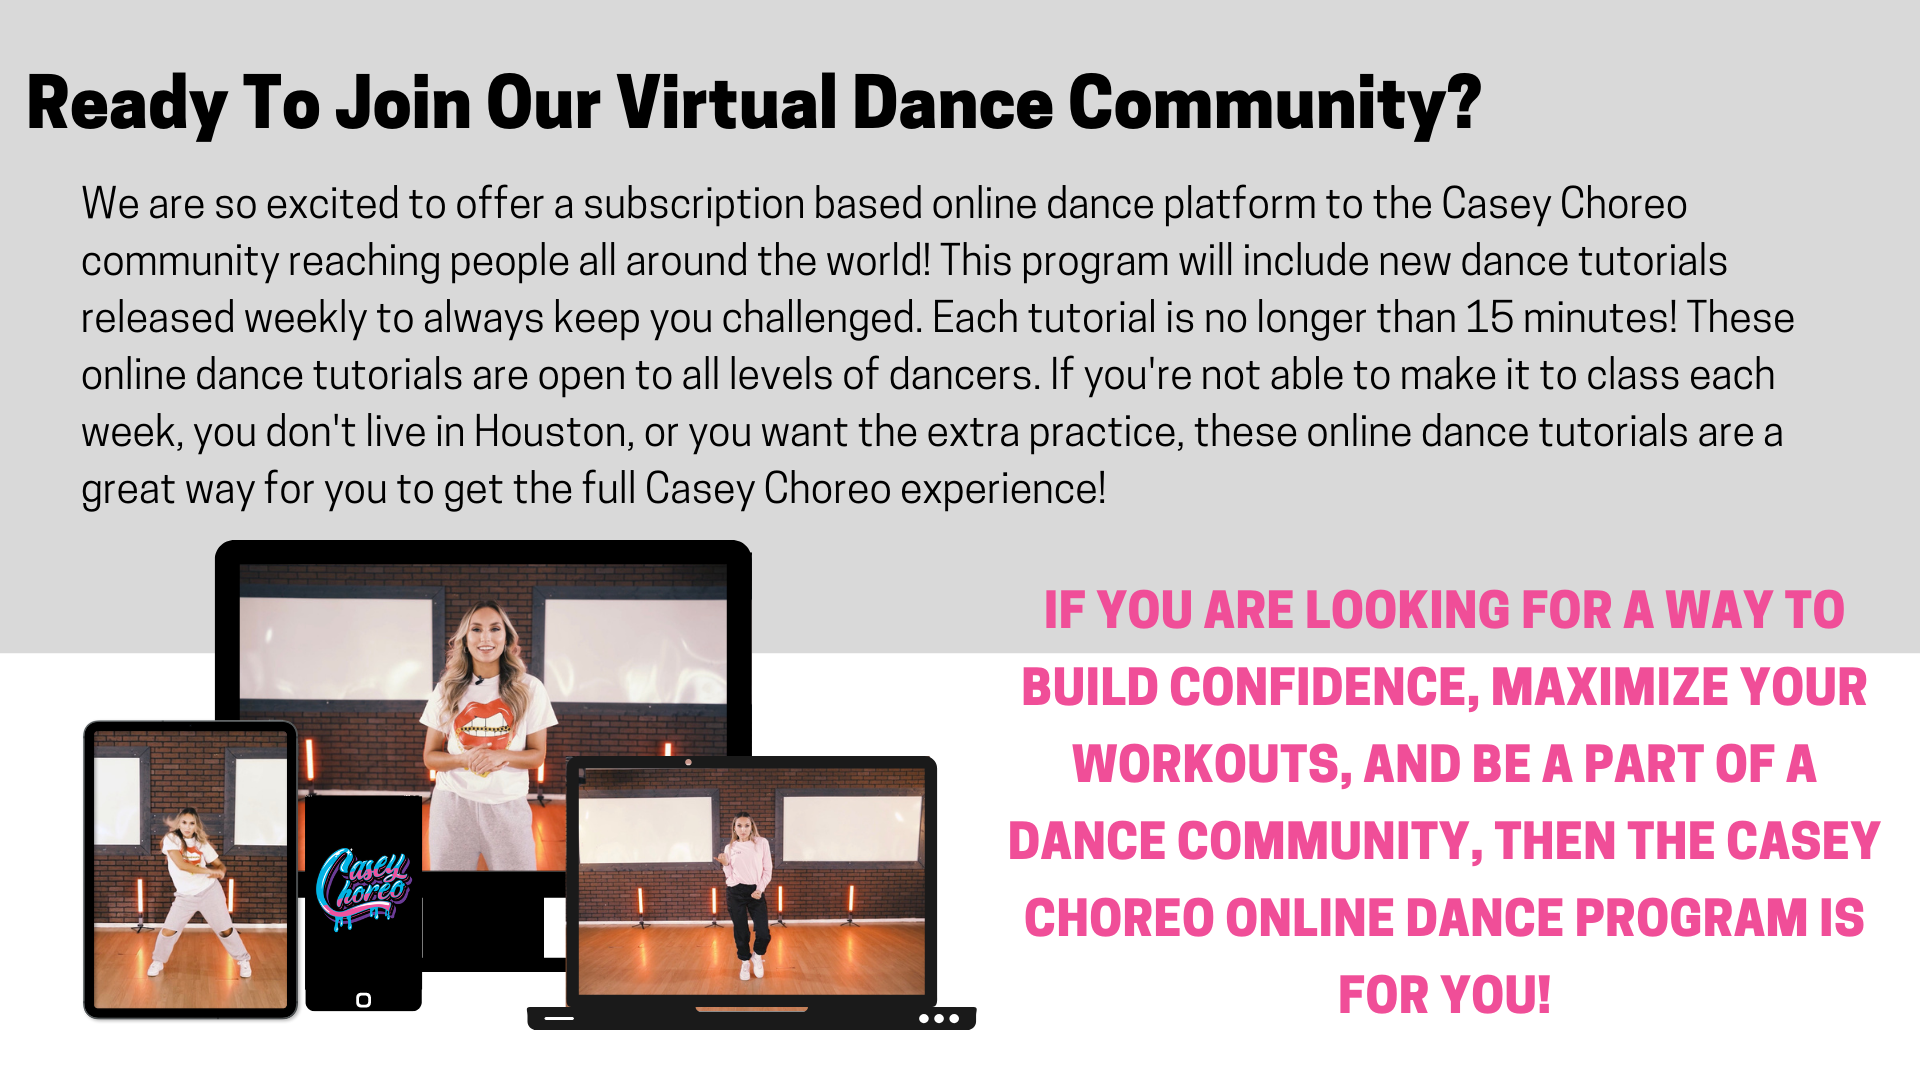 Graphic describing the qualities of joining the CaseyChoreo online dance platform